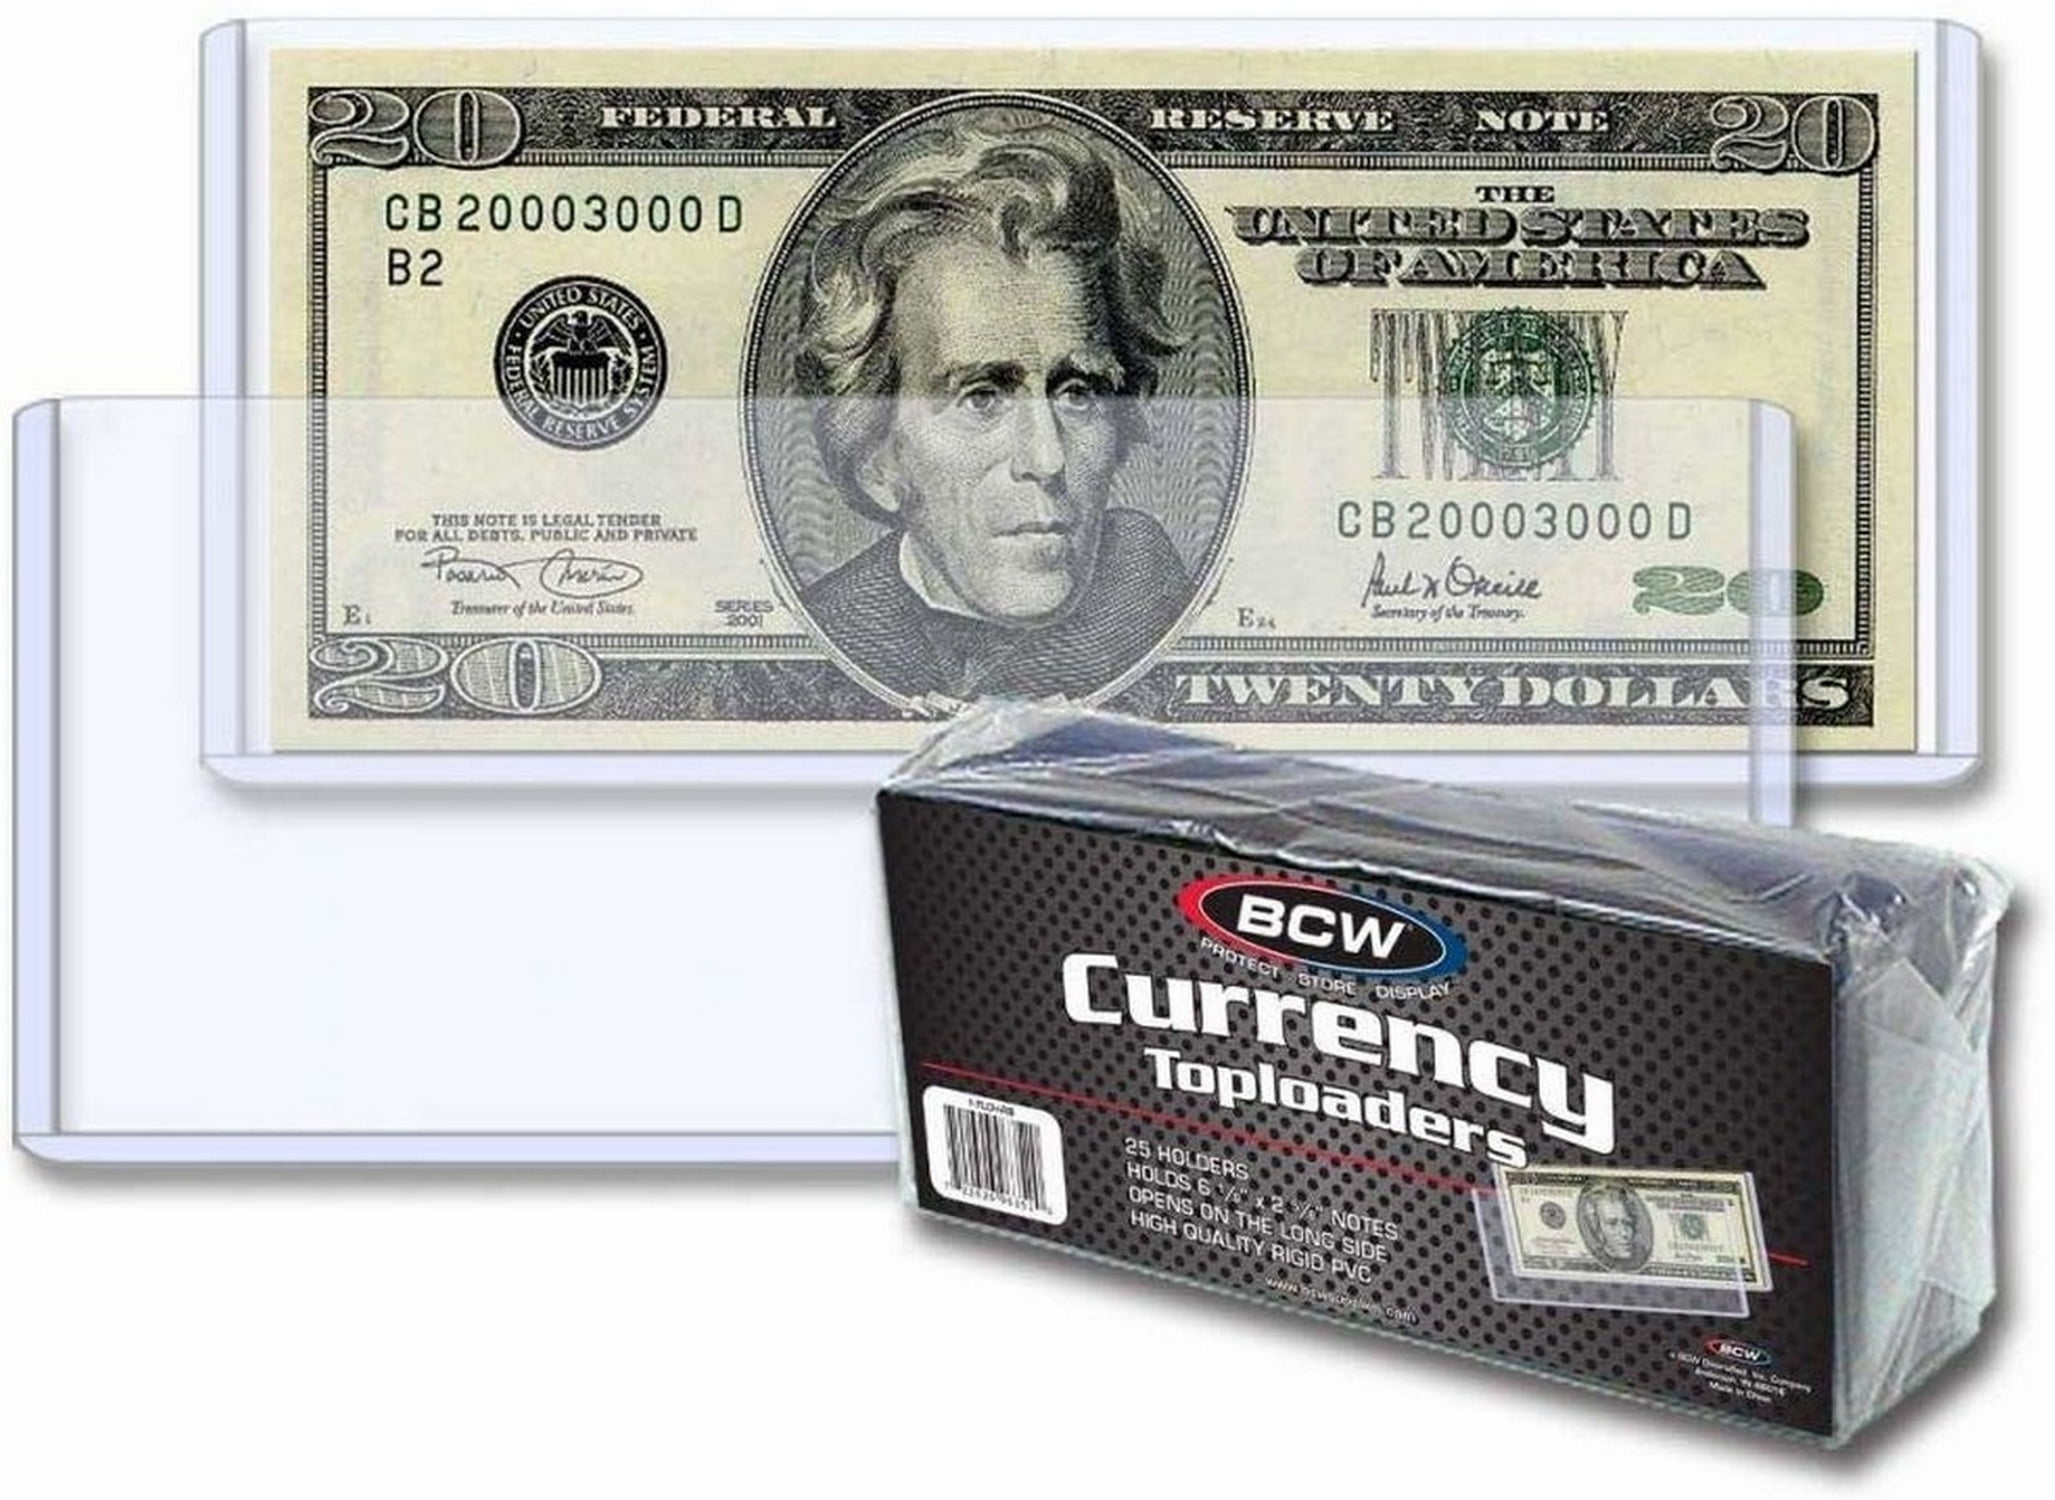 BILL & OTHER CURRENCY HOLDS 1 U.S REGULAR BILL-RIGID 10 DELUXE CURRENCY SLABS 